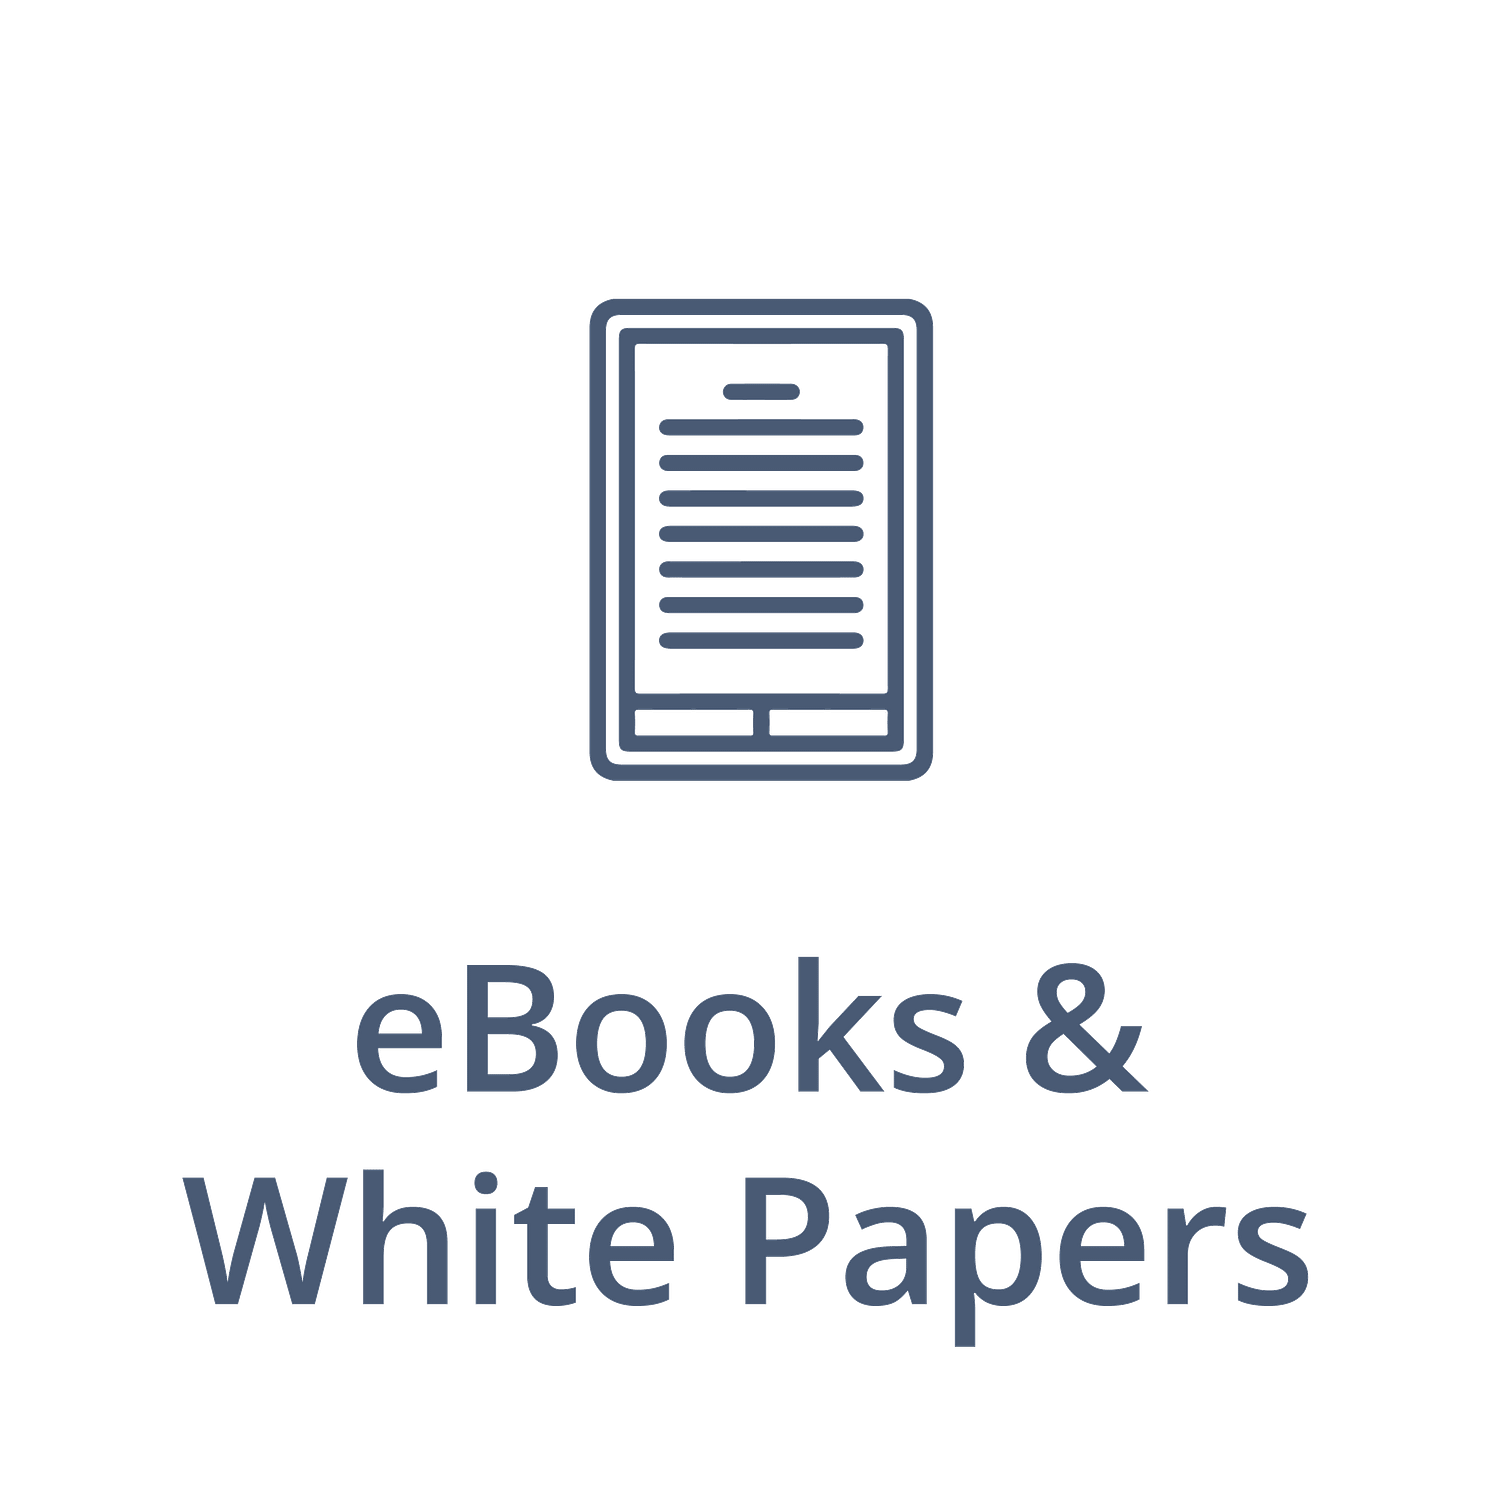 eBooks and White papers for manufacturing and agriculture companies